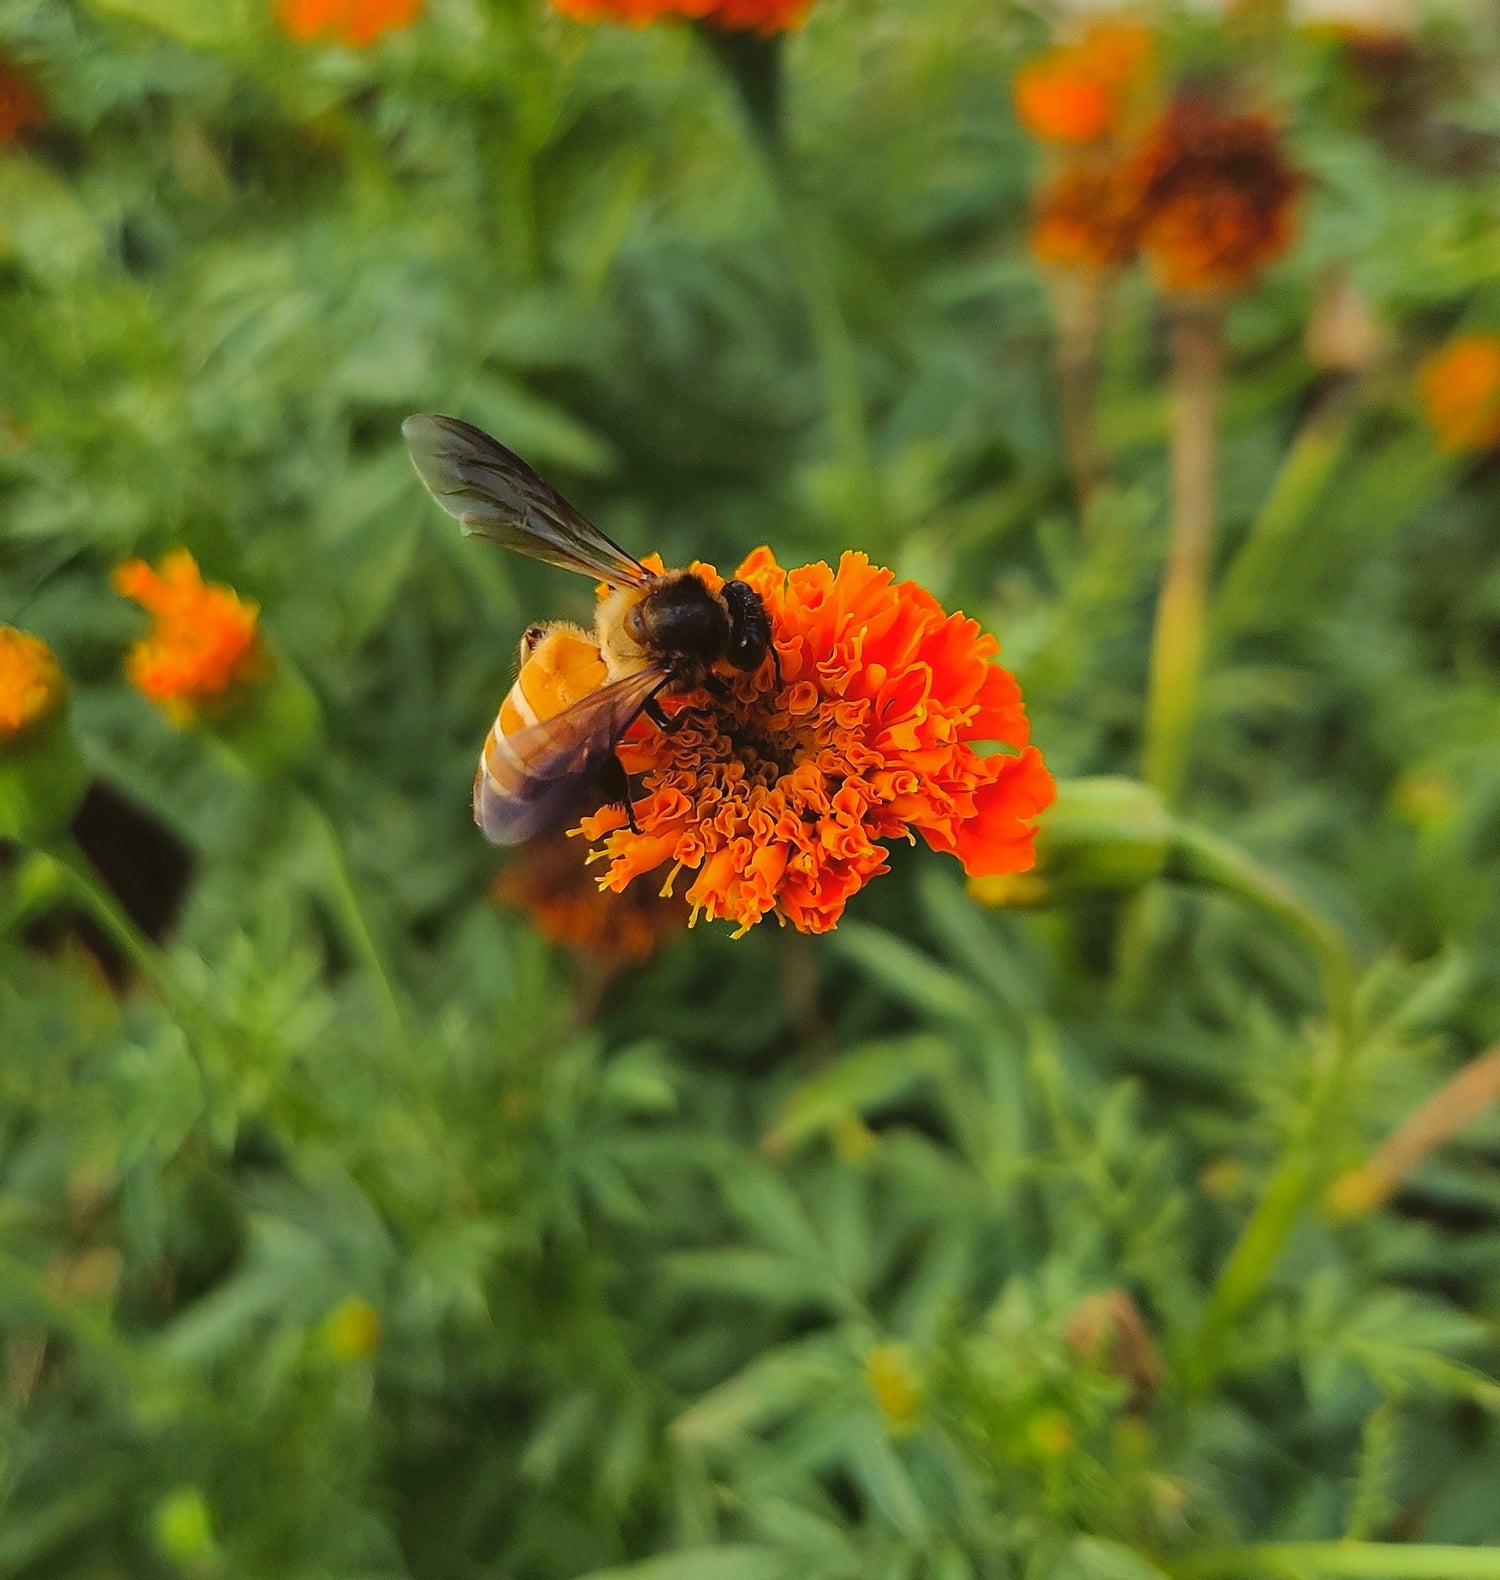 A bee pollinating an orange flower.